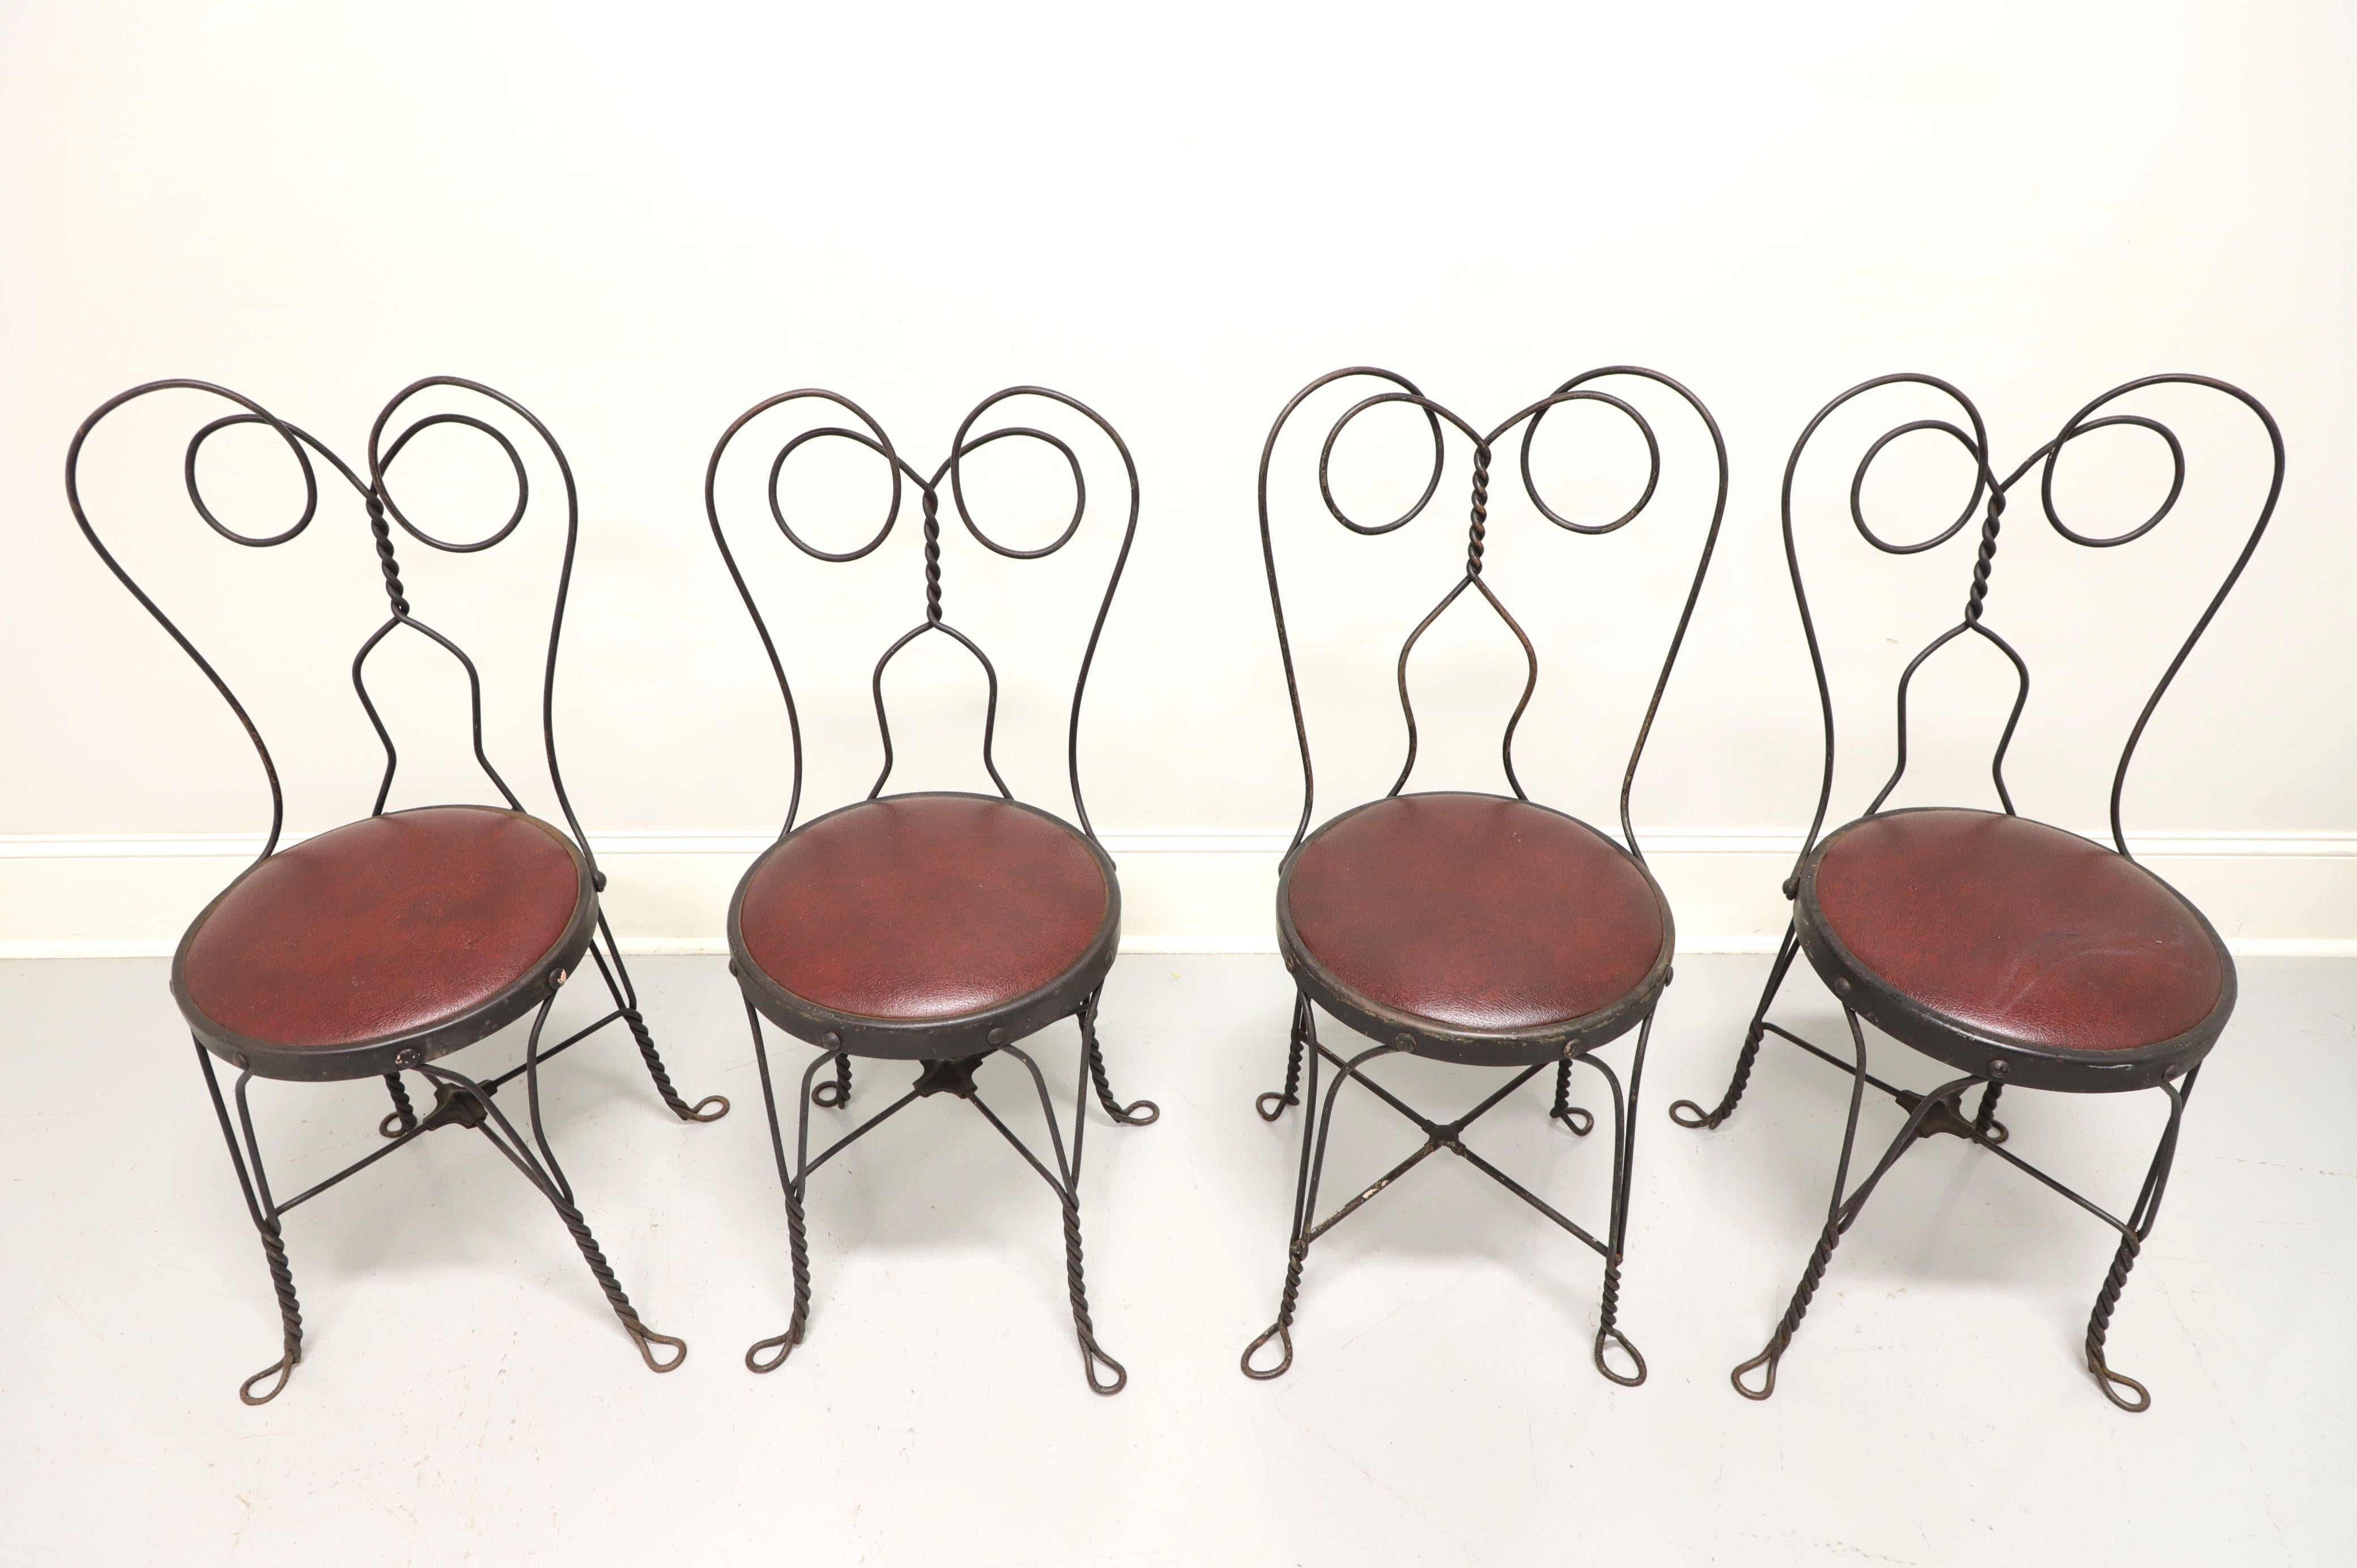 A set of four Victorian style wrought iron ice cream parlor bistro chairs, unbranded. Wrought iron metal frames, distressed black painted finish, burgundy color upholstered seats, twisted backs and legs. Ready for a fresh coat of paint or can be